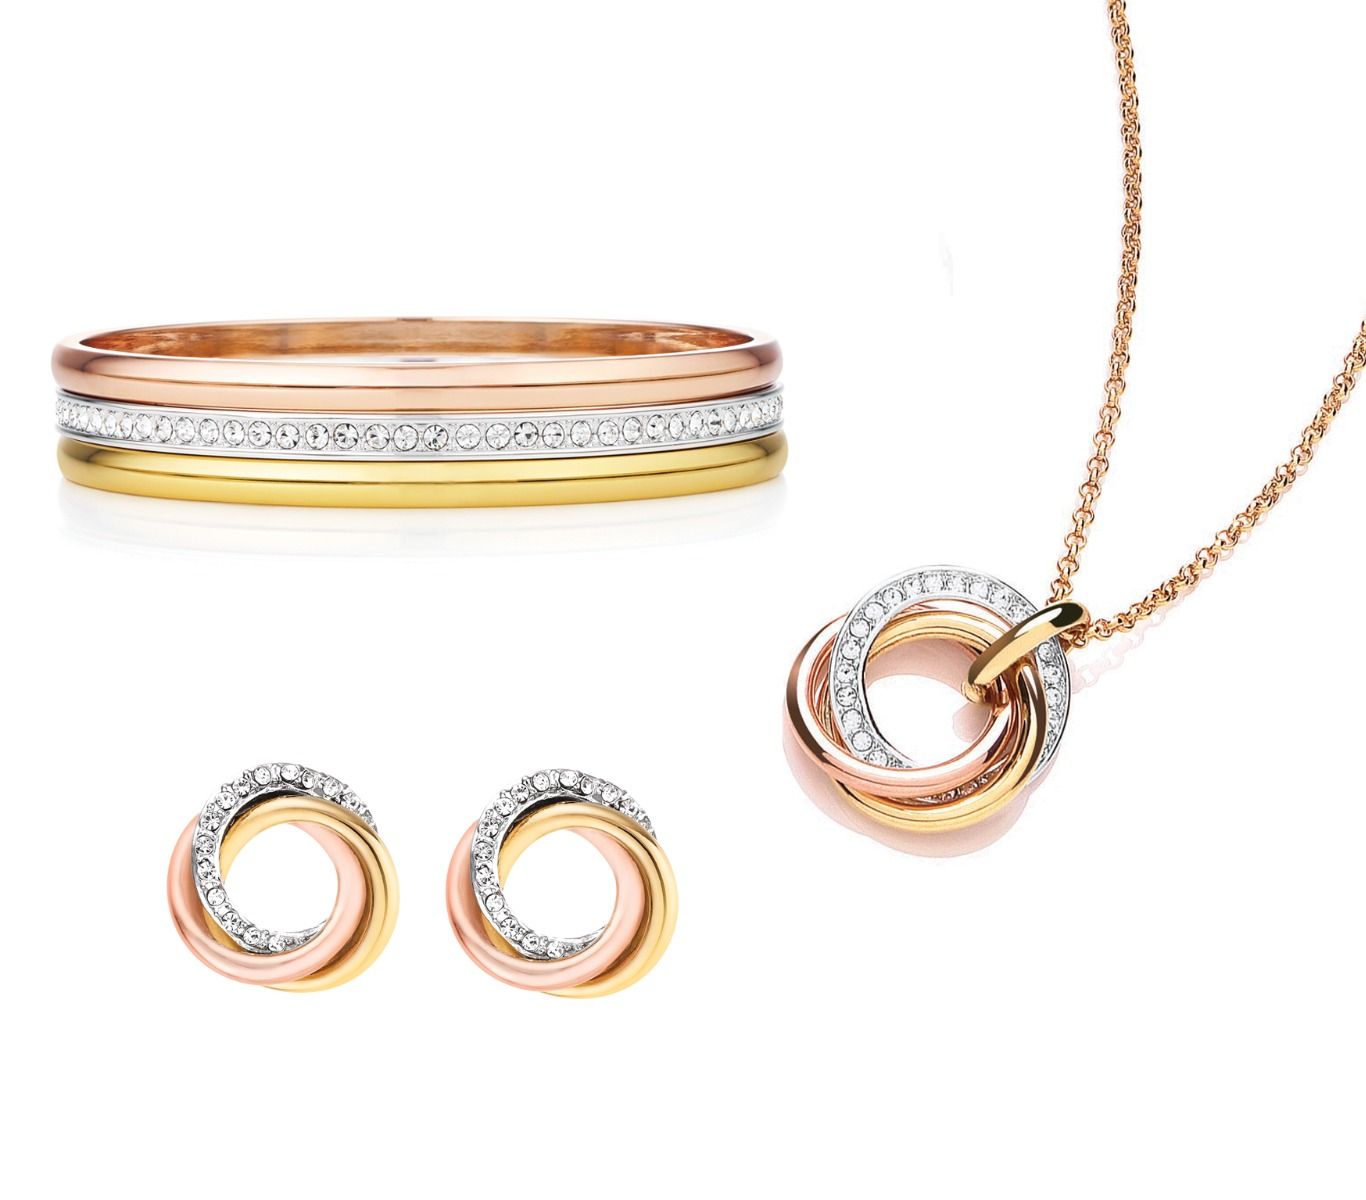 Our famous trilogy pendant, bangle and earrings mixed together to create a timeless set. Packaged in a Buckley London box.